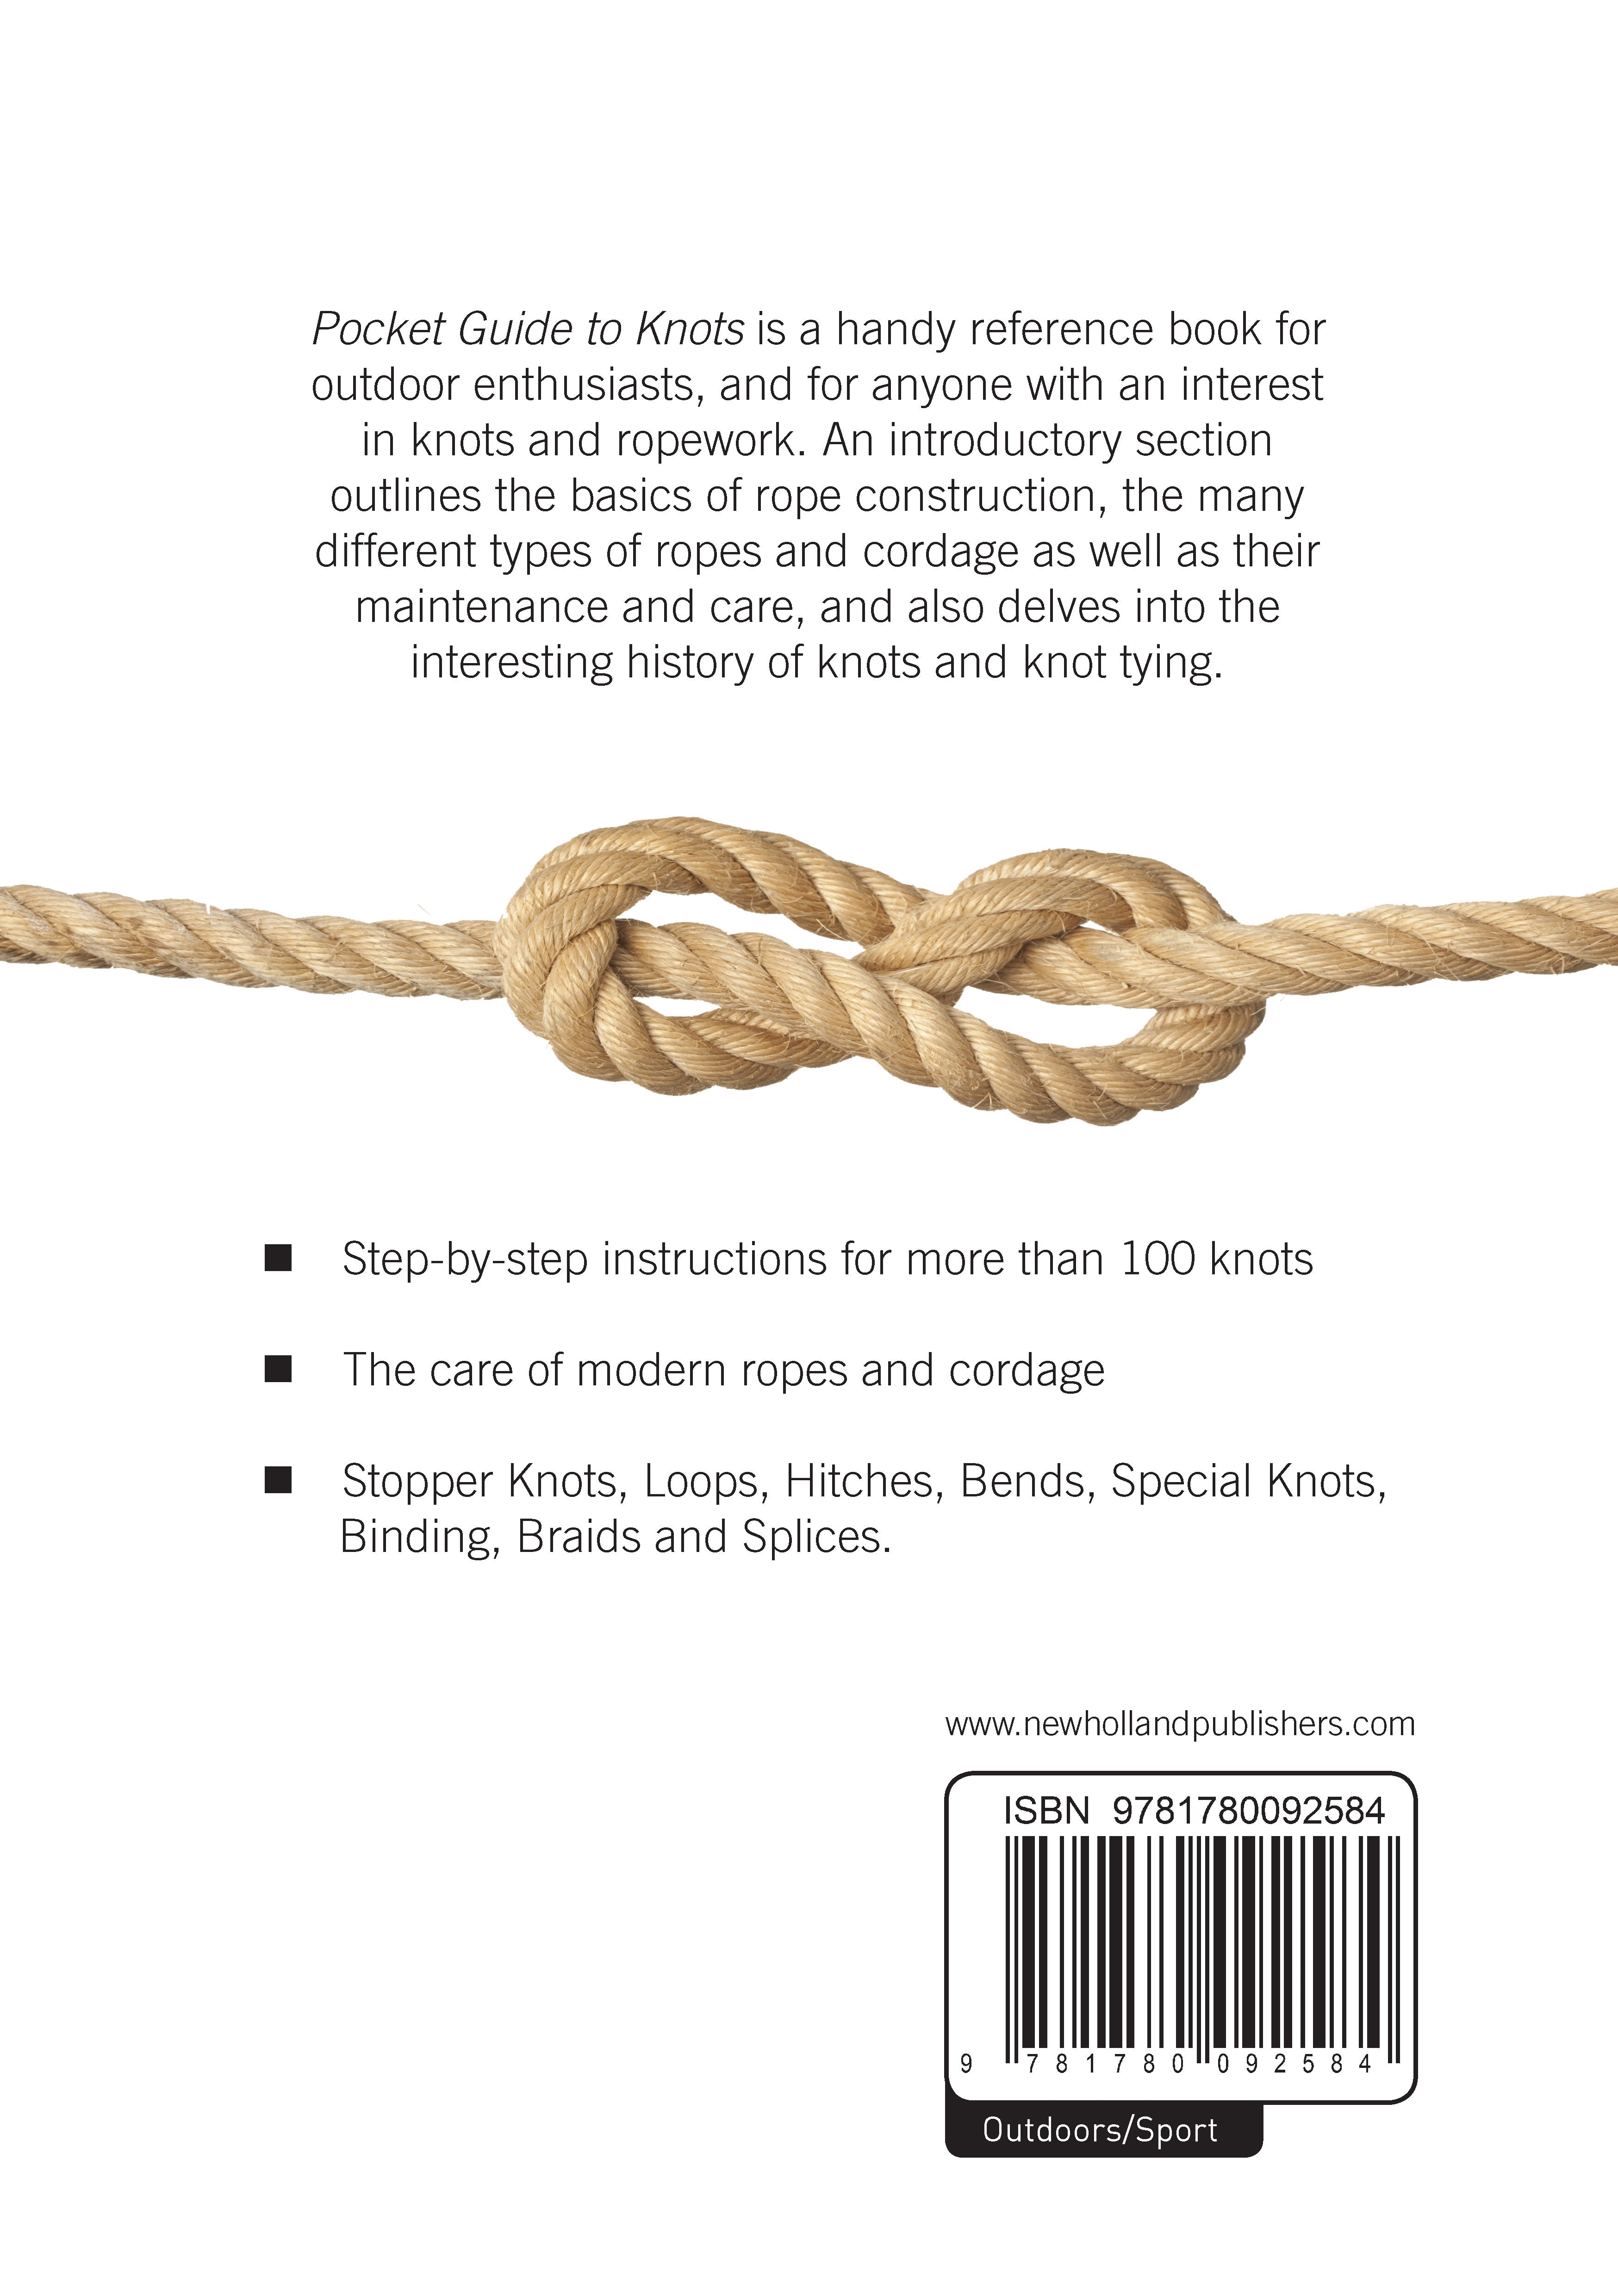 Pocket Guide to Knots [Book]